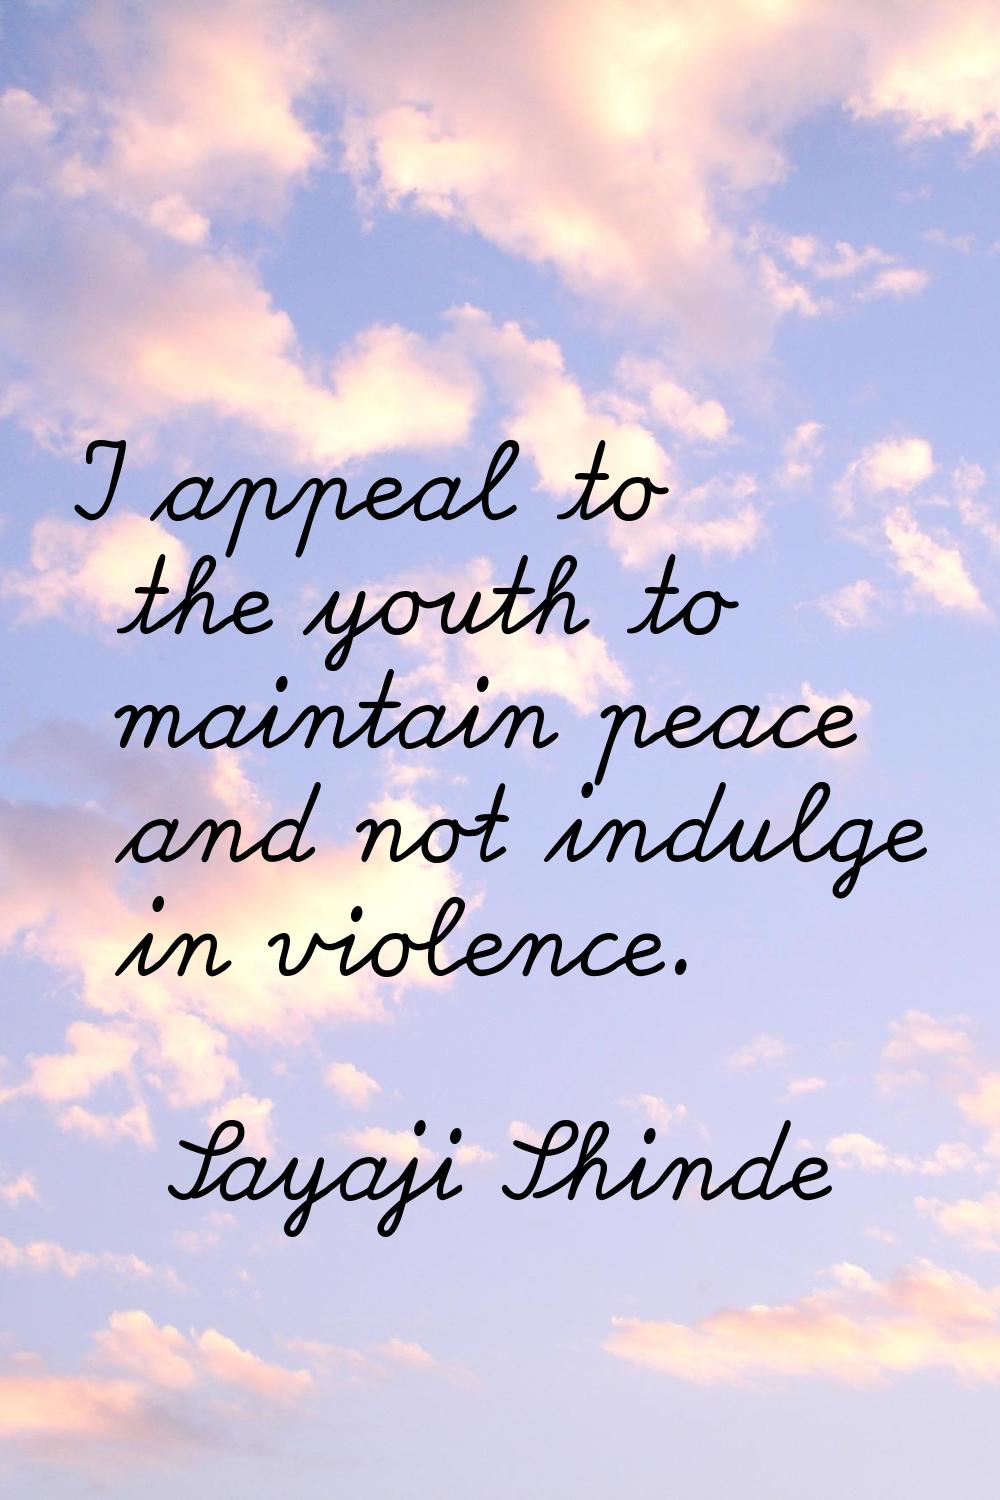 I appeal to the youth to maintain peace and not indulge in violence.